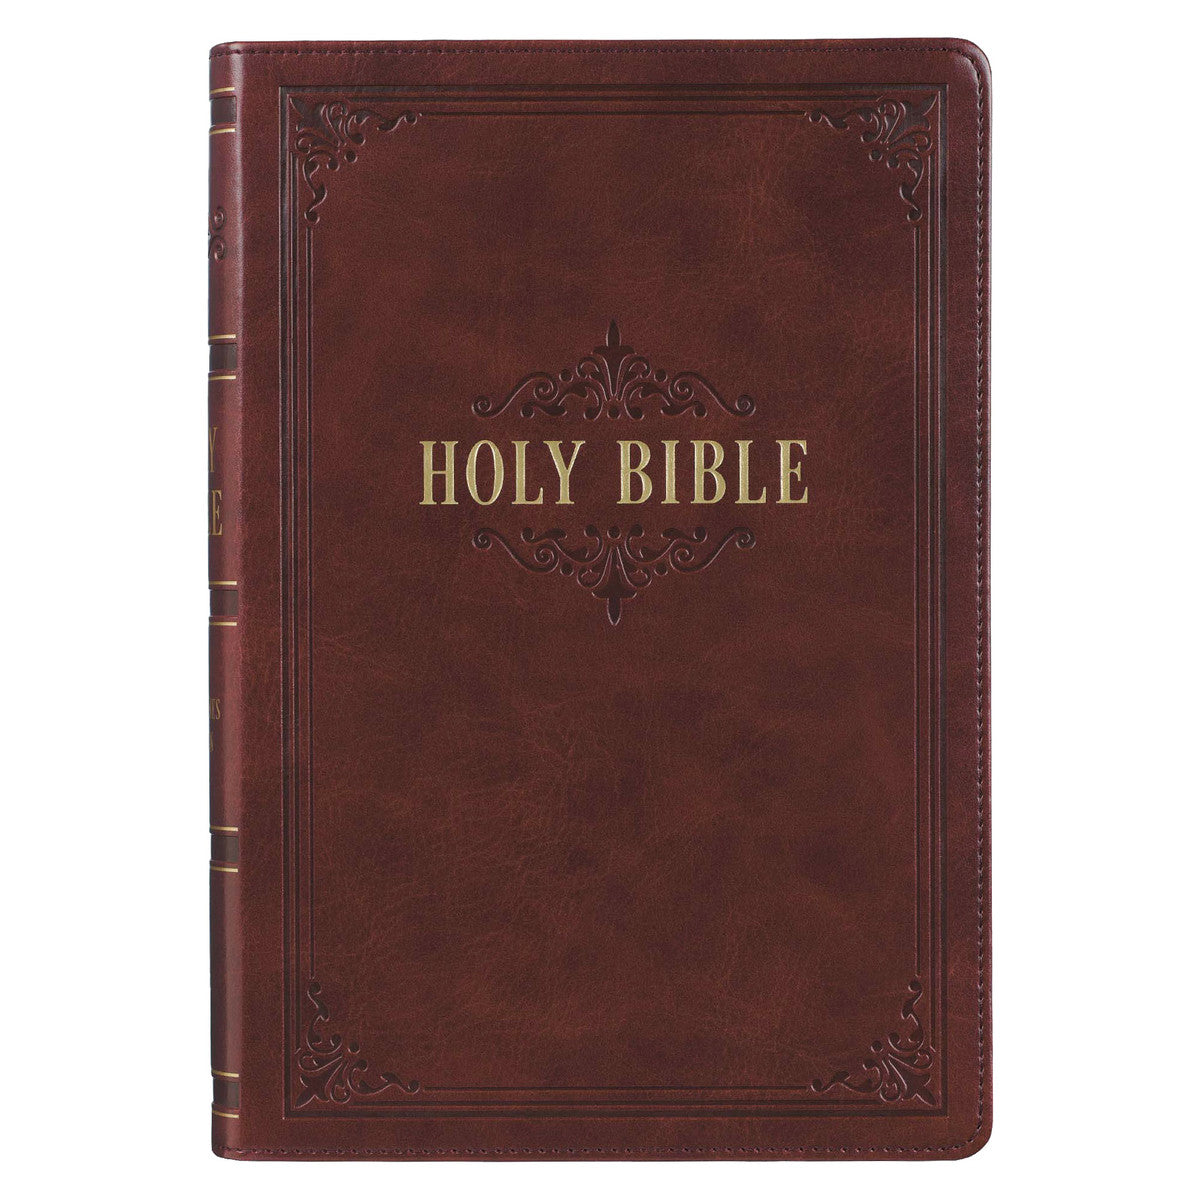 Burgundy Faux Leather Full-size Giant Print King James Version Bible with Thumb Index